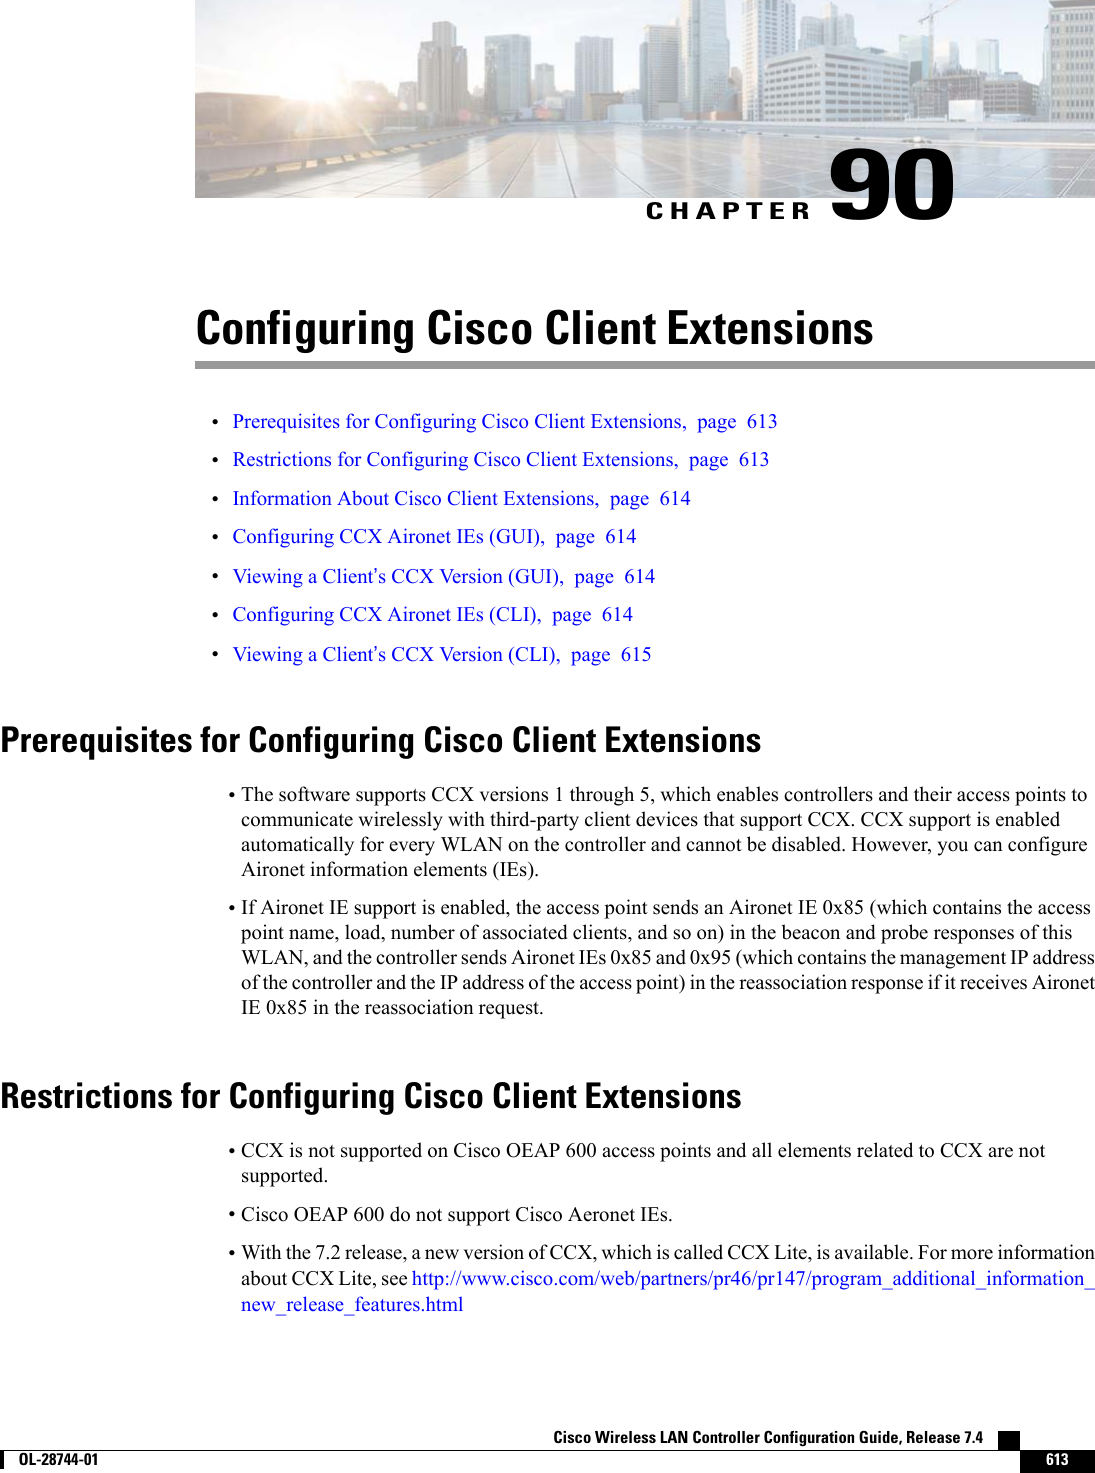 CHAPTER 90Configuring Cisco Client Extensions•Prerequisites for Configuring Cisco Client Extensions, page 613•Restrictions for Configuring Cisco Client Extensions, page 613•Information About Cisco Client Extensions, page 614•Configuring CCX Aironet IEs (GUI), page 614•Viewing a Client’s CCX Version (GUI), page 614•Configuring CCX Aironet IEs (CLI), page 614•Viewing a Client’s CCX Version (CLI), page 615Prerequisites for Configuring Cisco Client Extensions•The software supports CCX versions 1 through 5, which enables controllers and their access points tocommunicate wirelessly with third-party client devices that support CCX. CCX support is enabledautomatically for every WLAN on the controller and cannot be disabled. However, you can configureAironet information elements (IEs).•If Aironet IE support is enabled, the access point sends an Aironet IE 0x85 (which contains the accesspoint name, load, number of associated clients, and so on) in the beacon and probe responses of thisWLAN, and the controller sends Aironet IEs 0x85 and 0x95 (which contains the management IP addressof the controller and the IP address of the access point) in the reassociation response if it receives AironetIE 0x85 in the reassociation request.Restrictions for Configuring Cisco Client Extensions•CCX is not supported on Cisco OEAP 600 access points and all elements related to CCX are notsupported.•Cisco OEAP 600 do not support Cisco Aeronet IEs.•With the 7.2 release, a new version of CCX, which is called CCX Lite, is available. For more informationabout CCX Lite, see http://www.cisco.com/web/partners/pr46/pr147/program_additional_information_new_release_features.htmlCisco Wireless LAN Controller Configuration Guide, Release 7.4        OL-28744-01 613